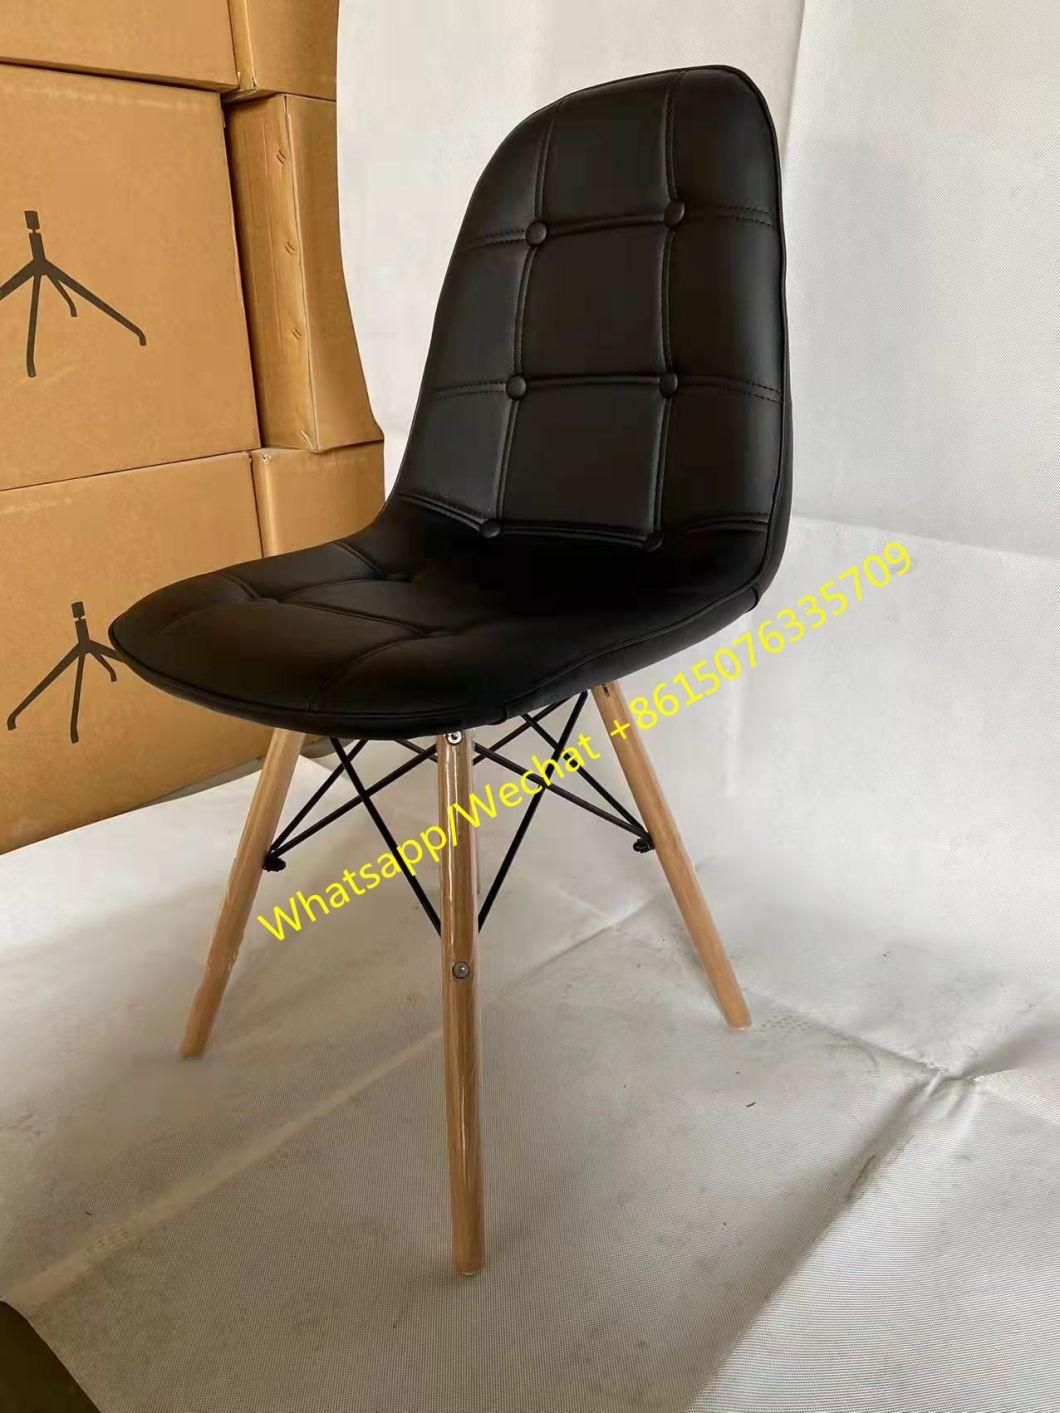 PU Leather Seat Wood Leg Padded Dining Chair Home Kitchen Furniture